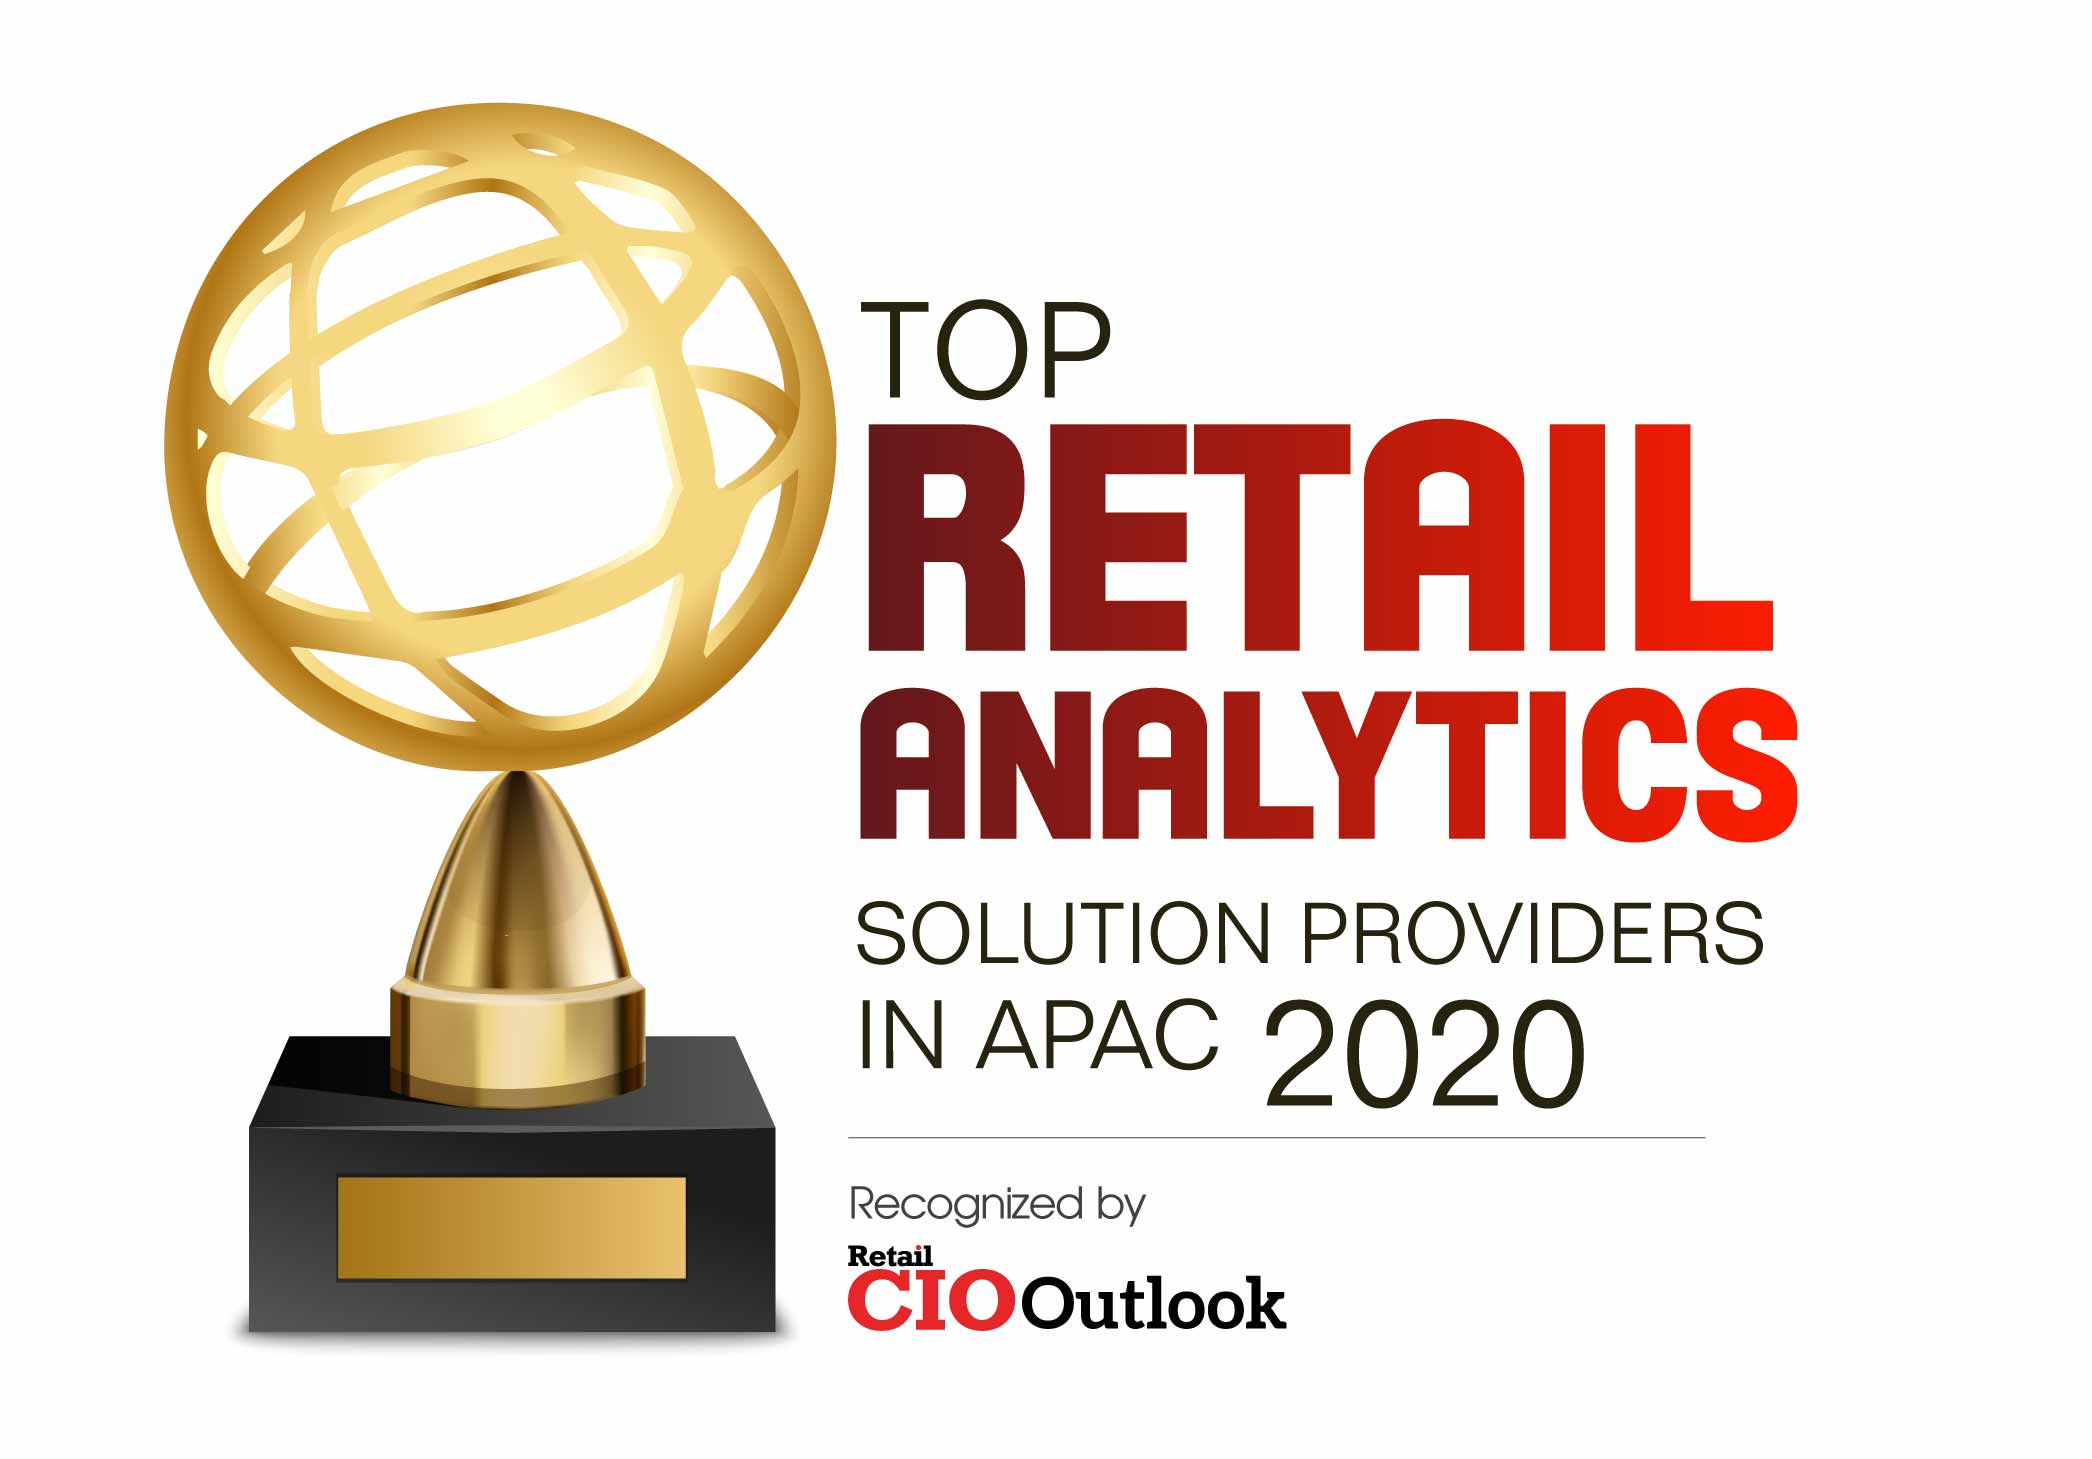 Top 10 Retail Analytics Solution Companies in APAC - 2020